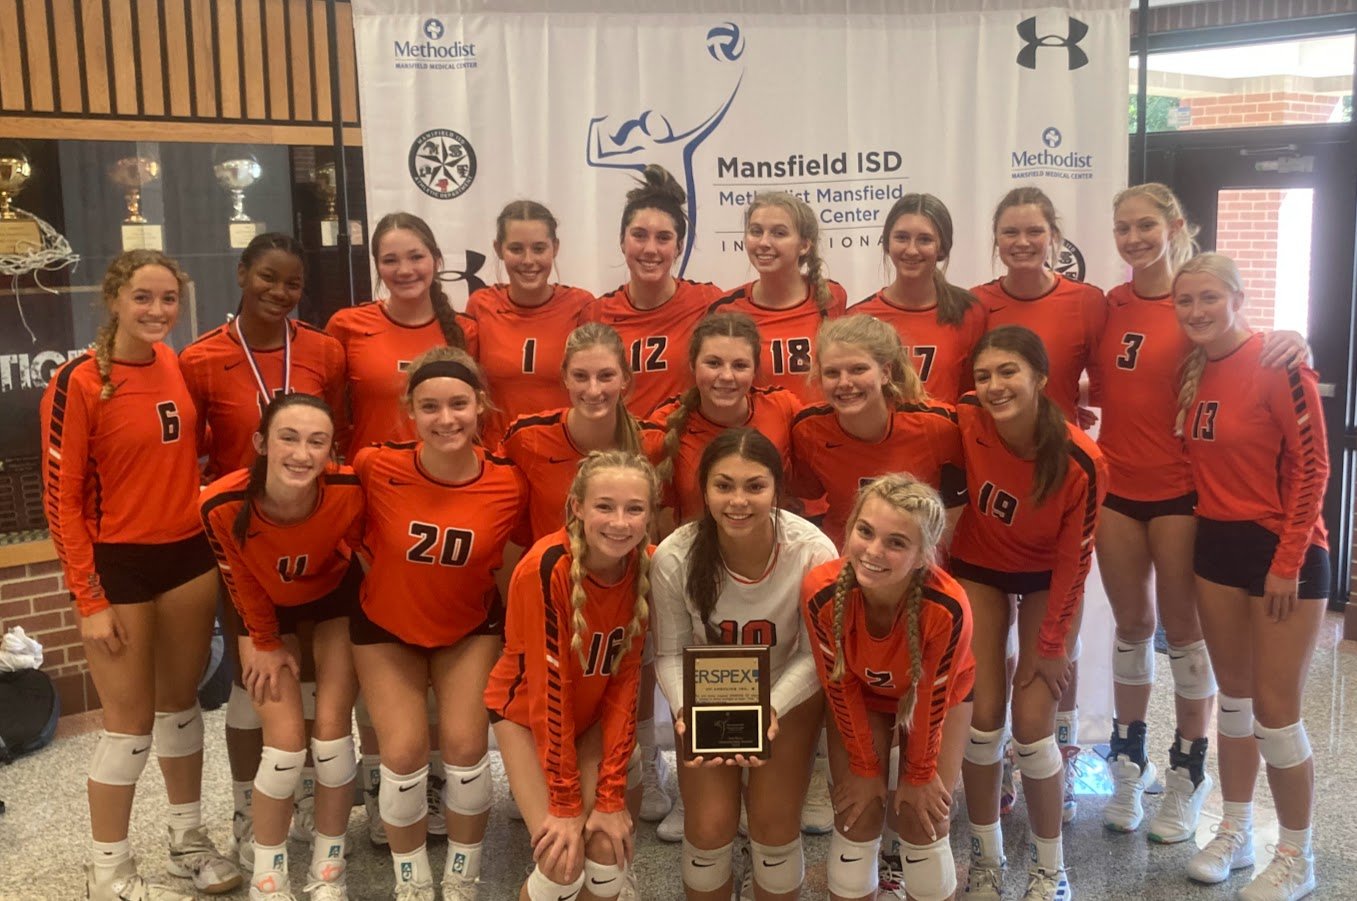 Aledo Ladycats pose after placing third in Mansfield ISD Tournament